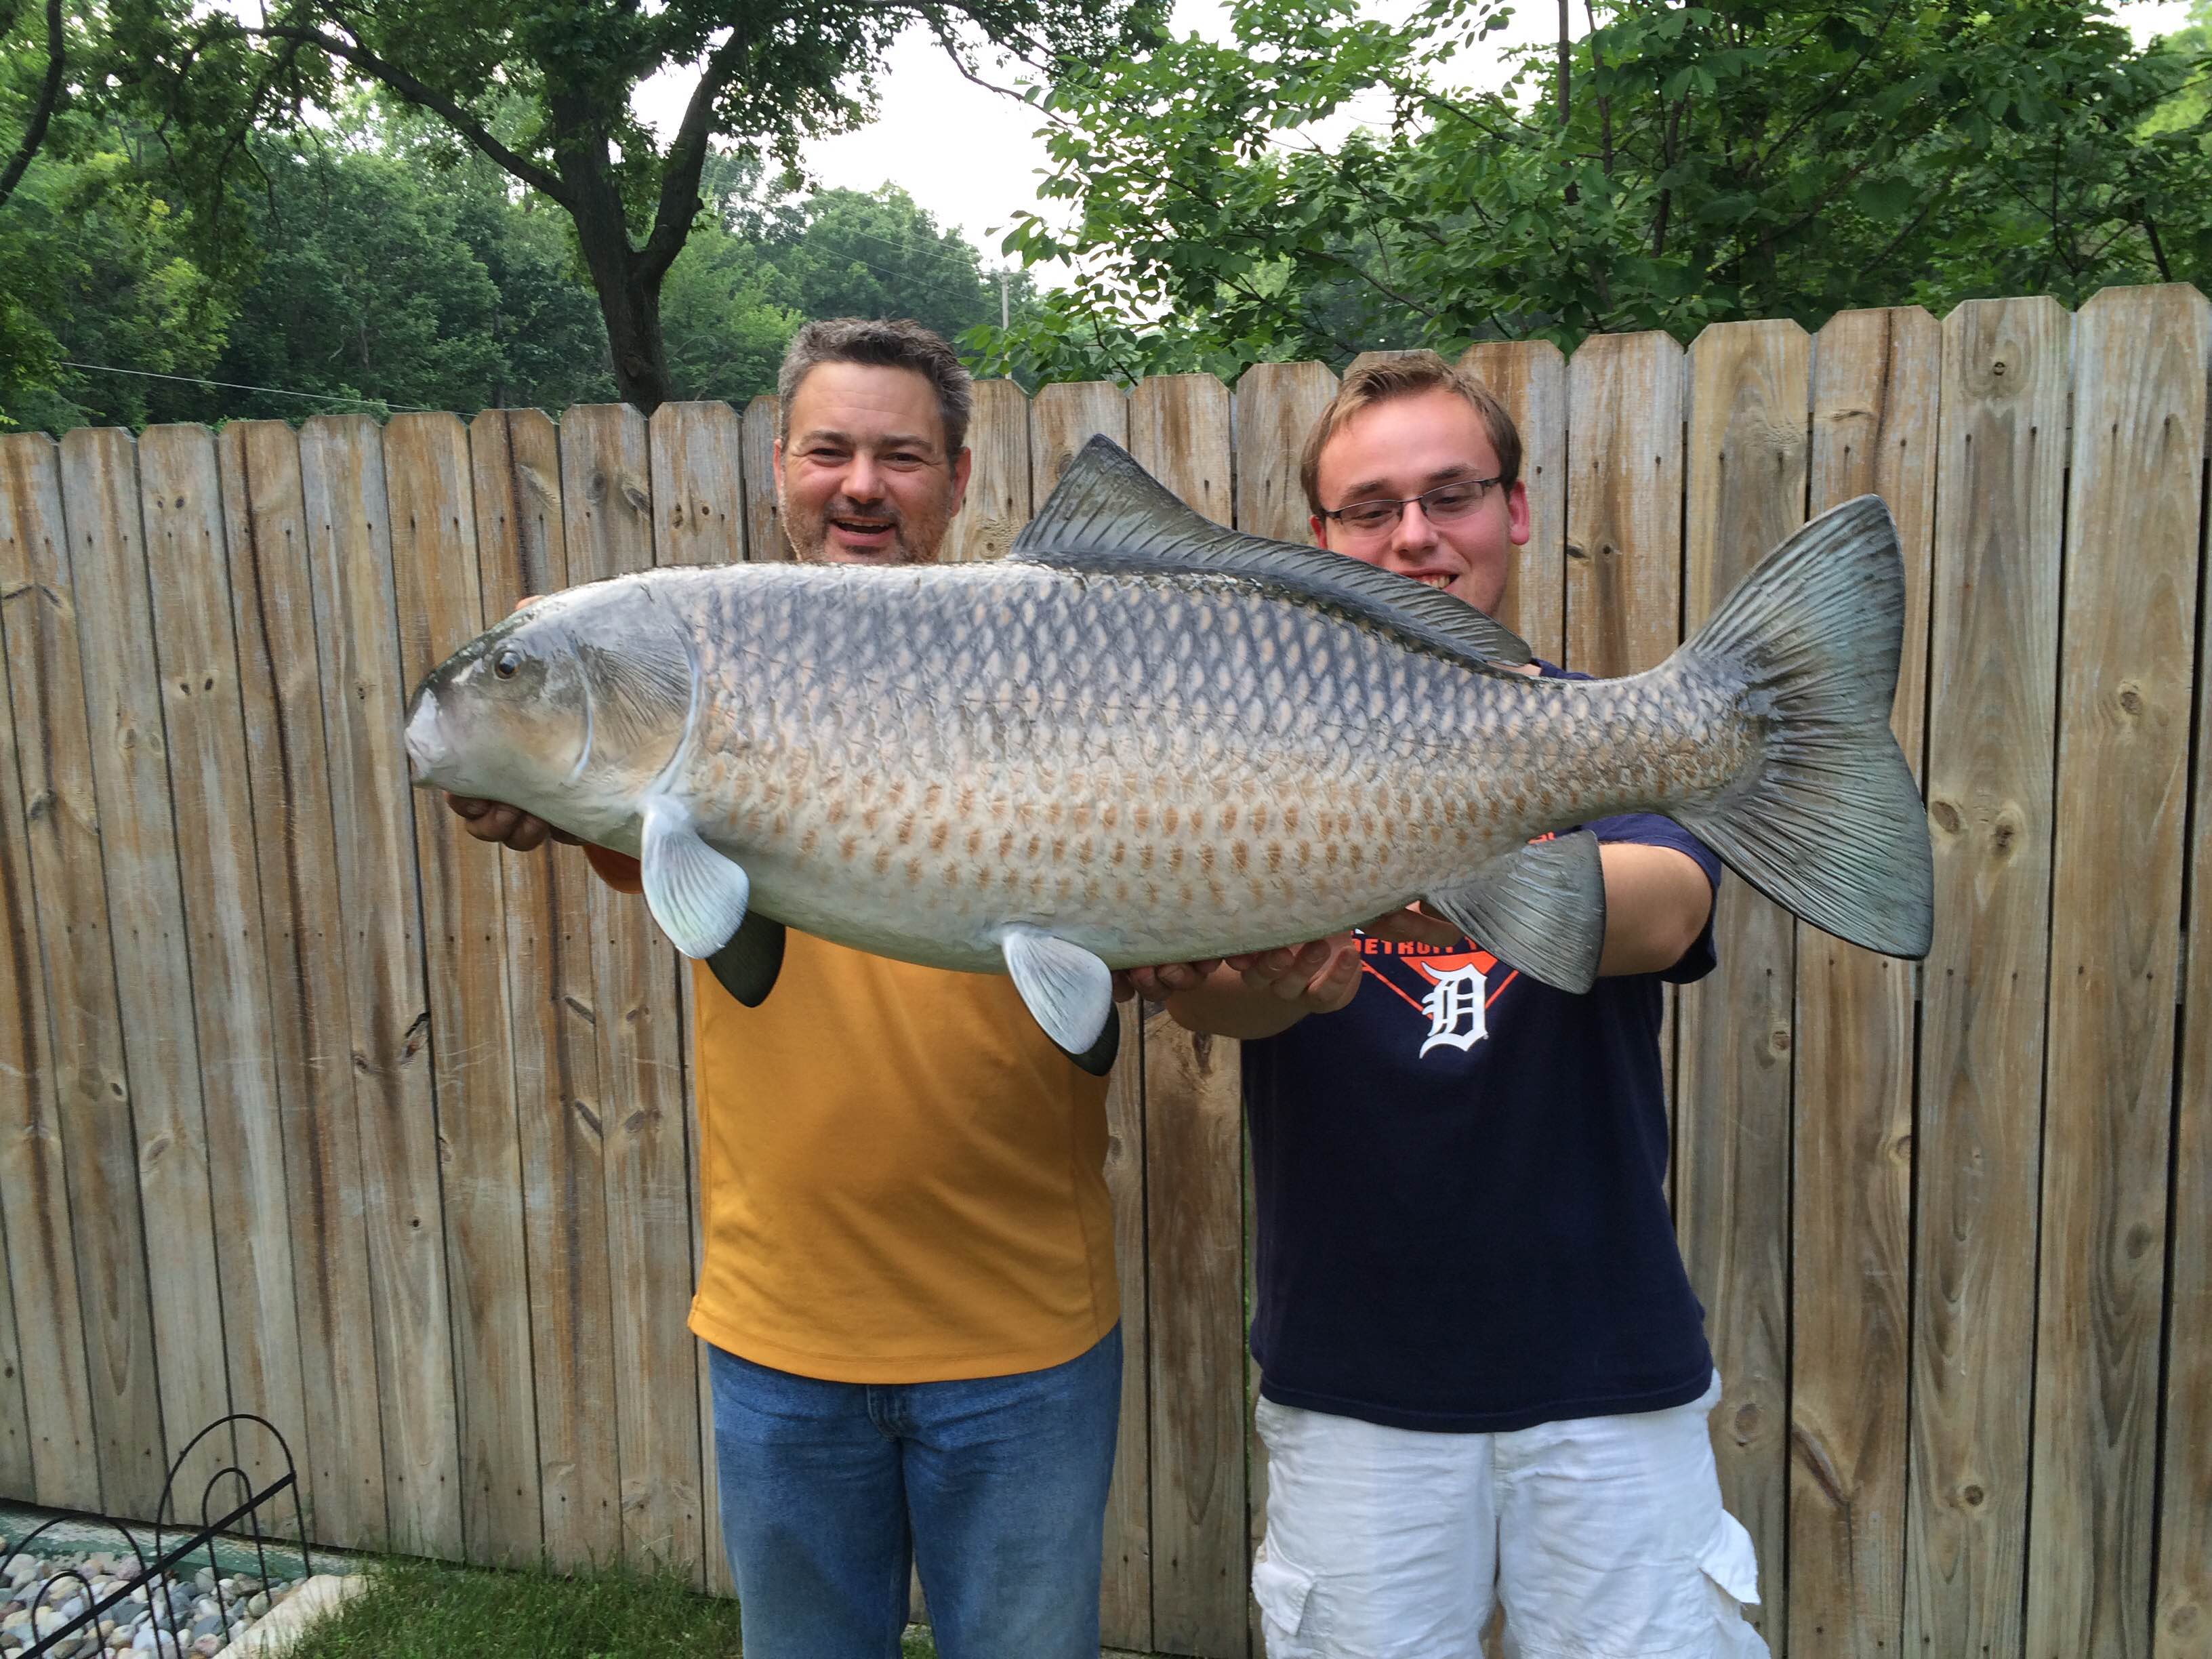 Tony and Josh Witherell hold a monster buffalo fish they caught in west Michigan. They’ve earned numerous master angler patches for fish they’ve caught over the years. (courtesy photo)